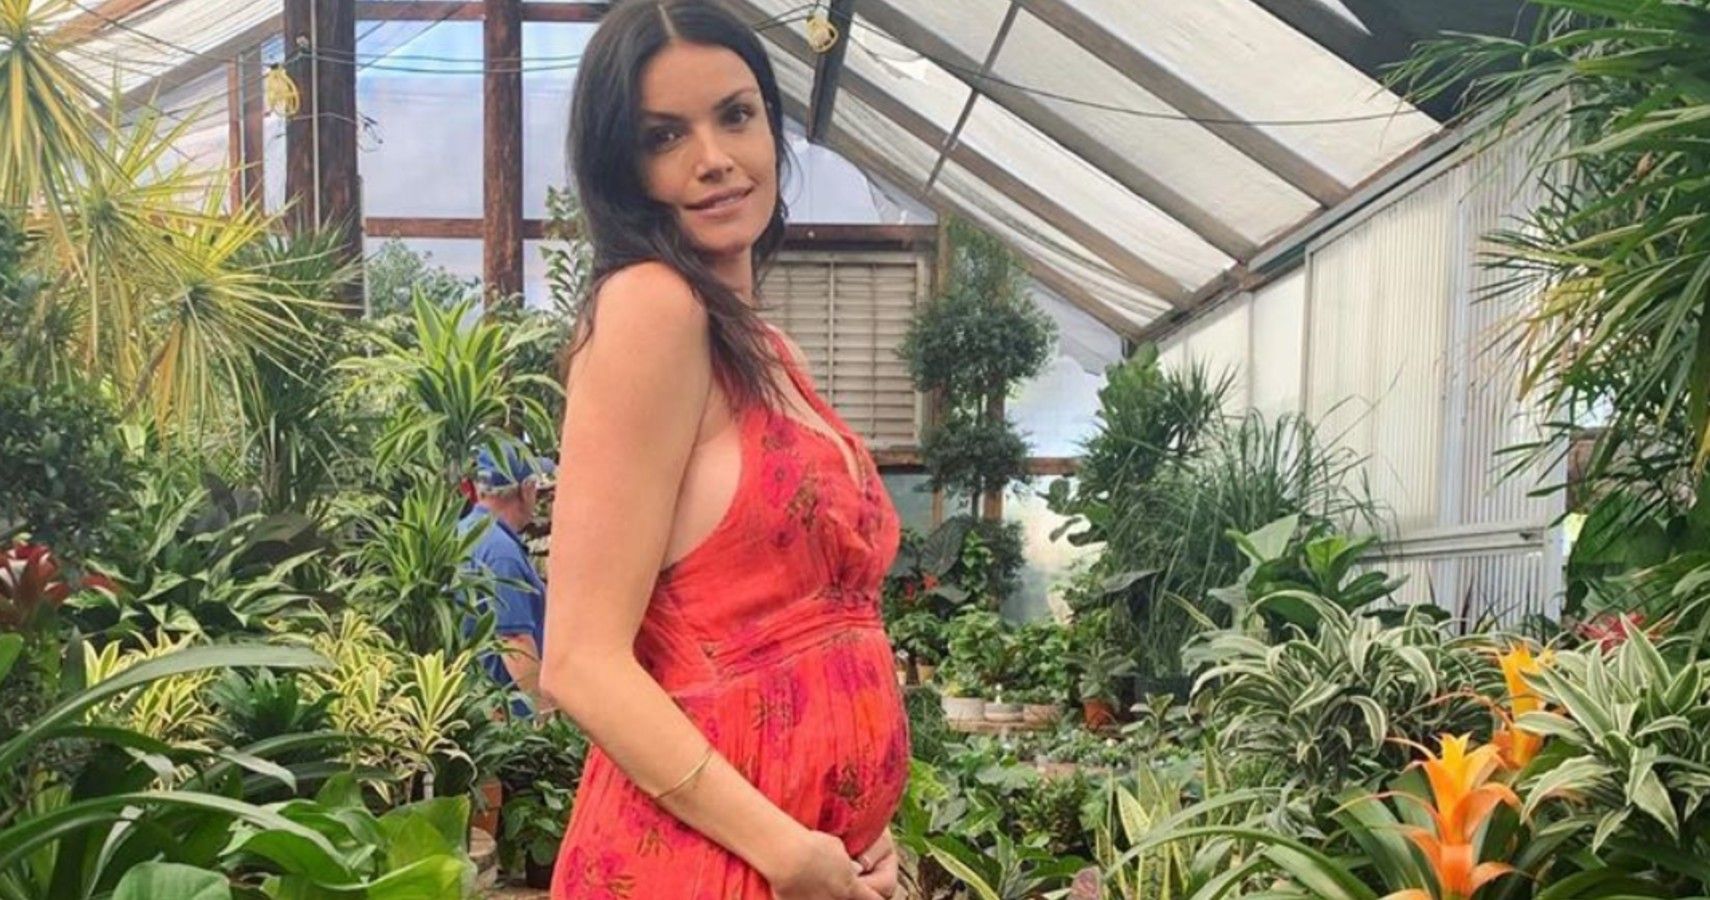 'The Bachelor' Winner Courtney Robertson Gives Birth To Her First Child